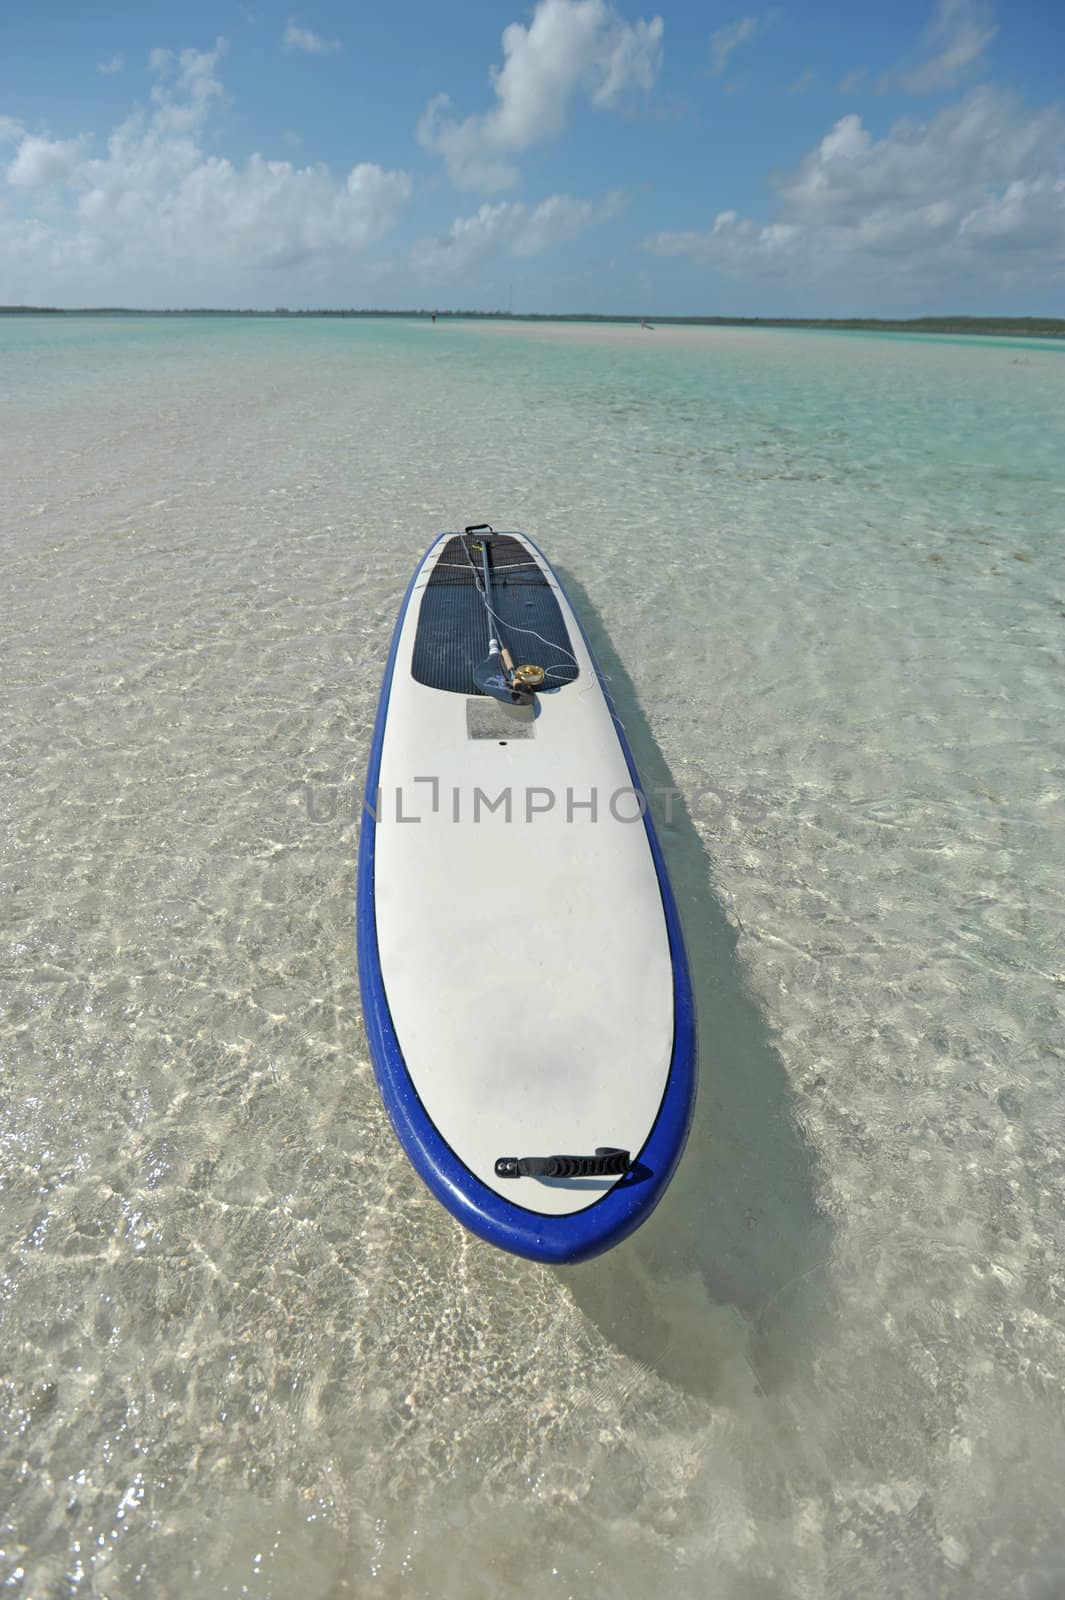 Paddle board in blue water in the Bahamas